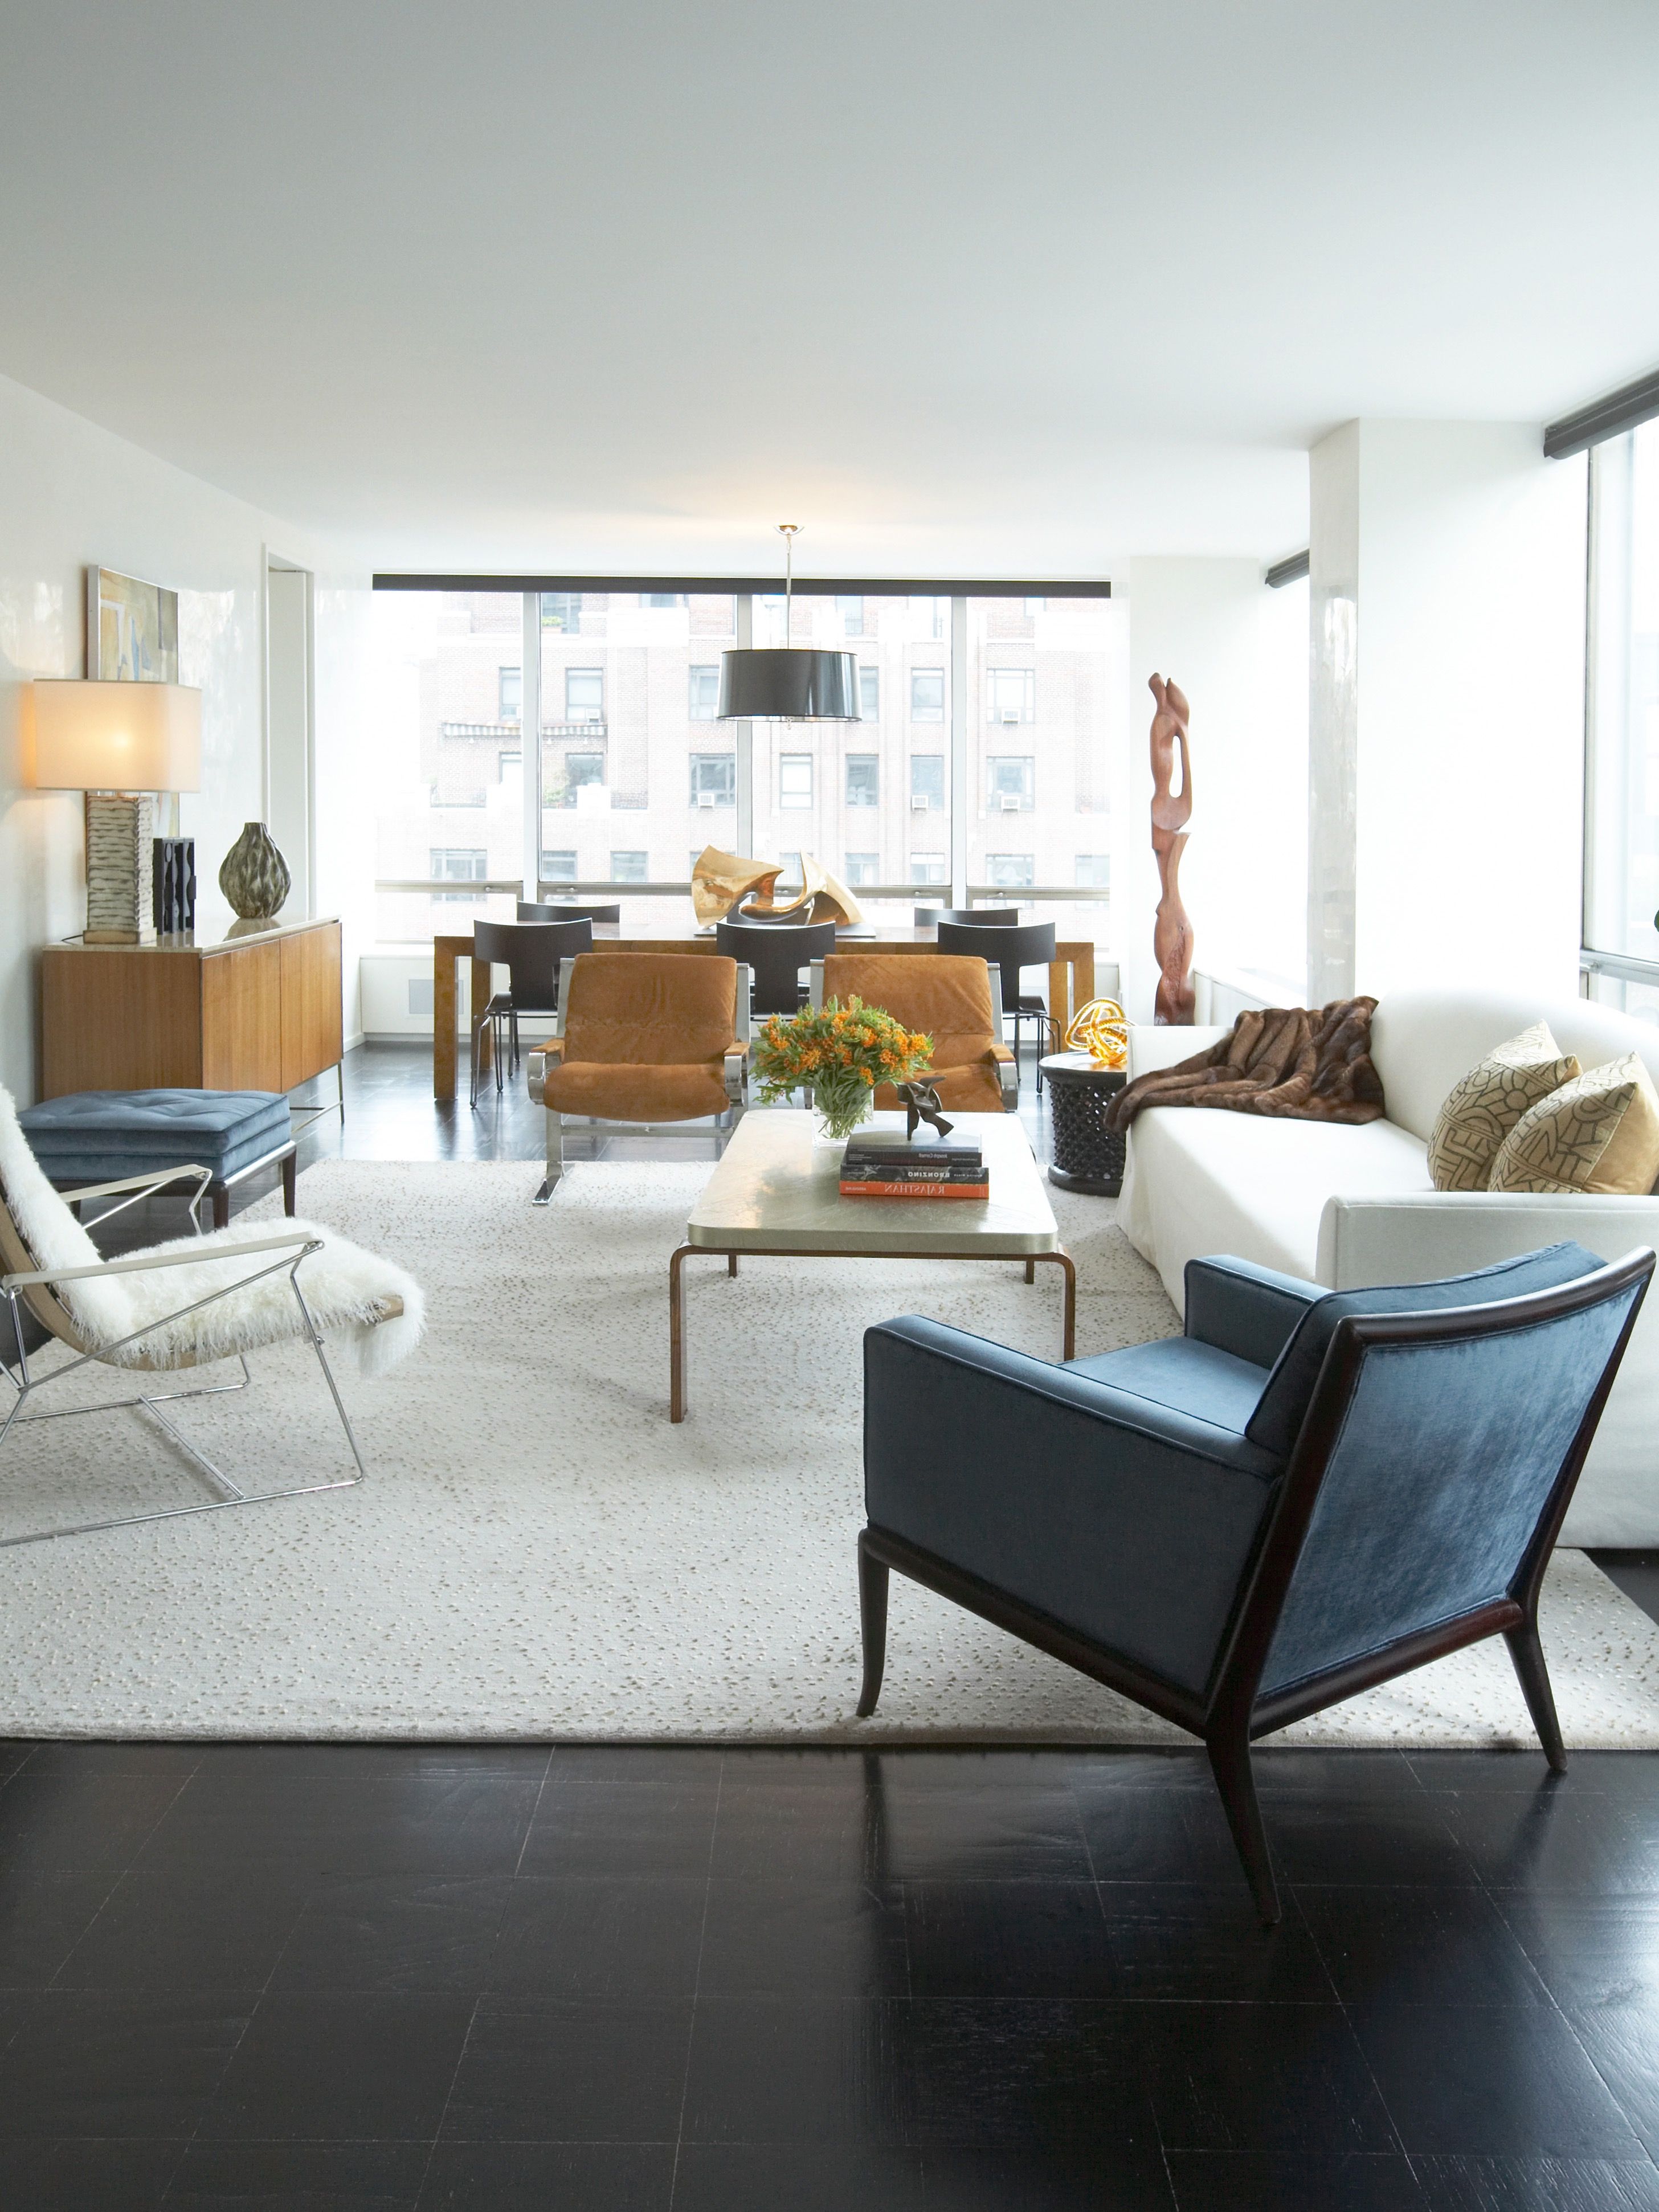 Urban White Apartment Living Room In Minimalist Style With Blue Velvet Chair (View 17 of 20)